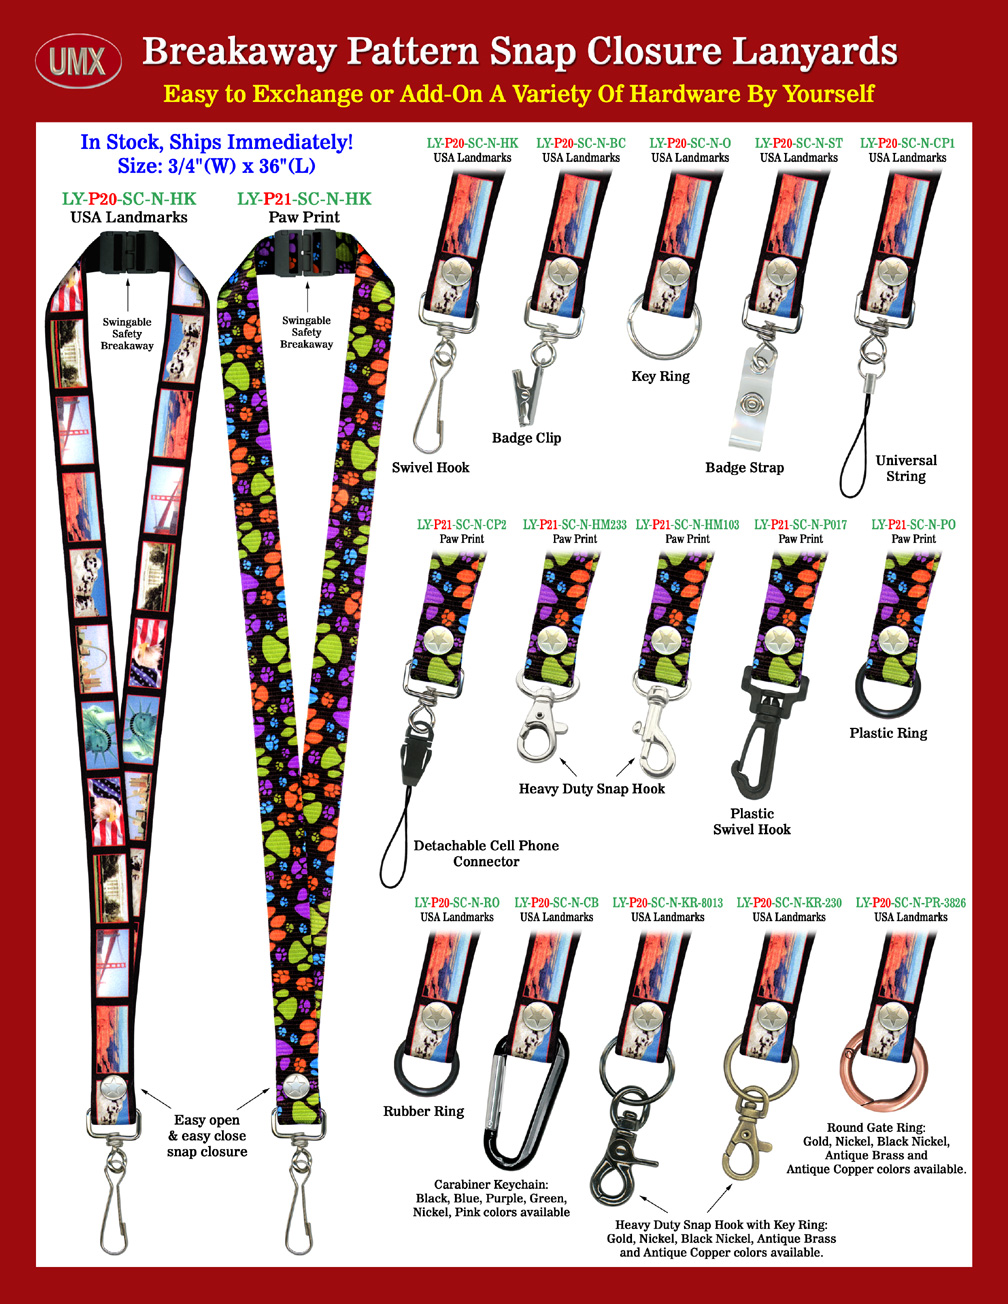 3/4" Safety Breakaway Snap-On Lanyards with Printed USA-Landmark and Paw-Print